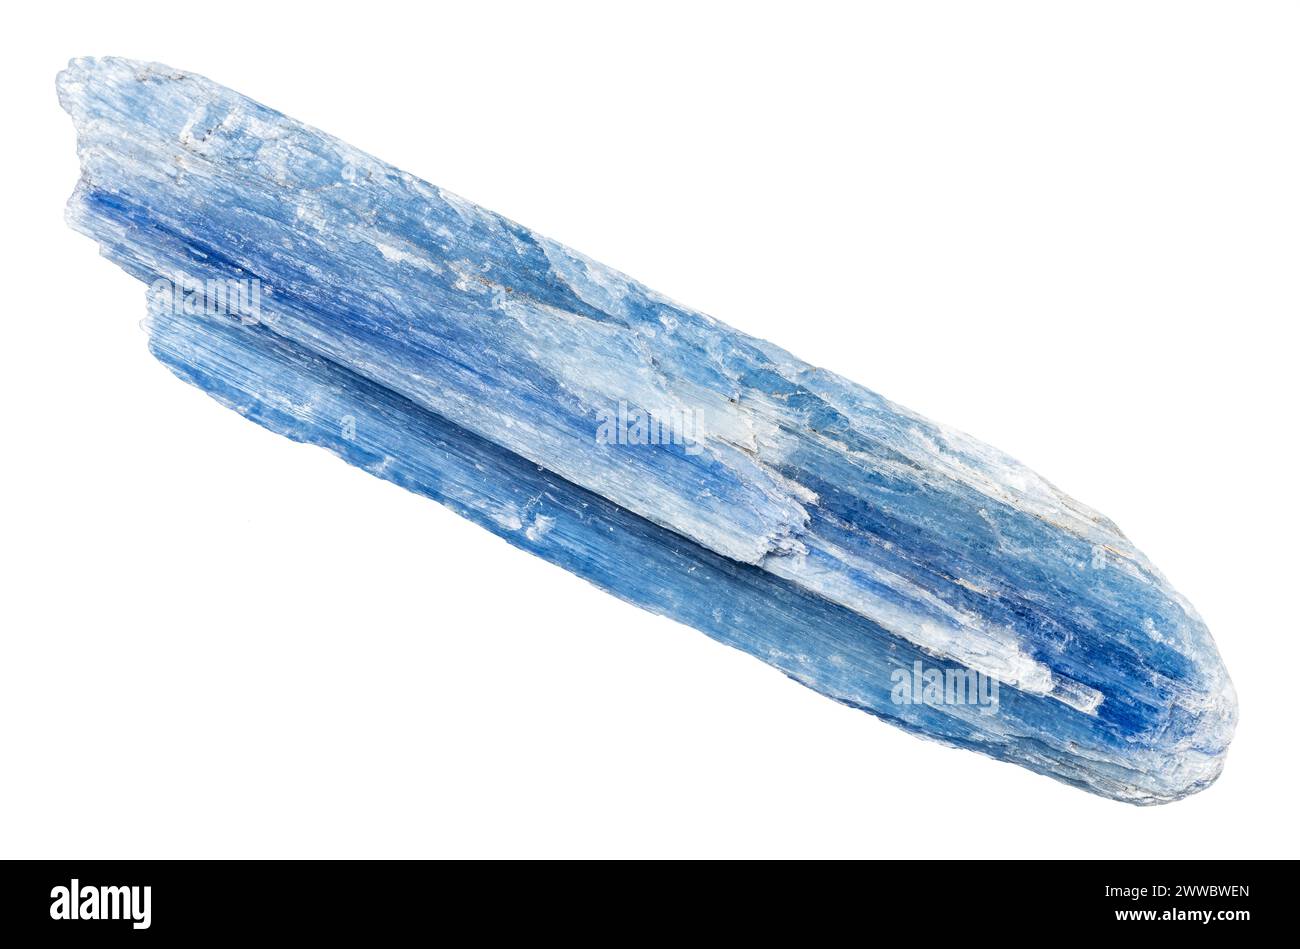 close up of sample of natural stone from geological collection - unpolished blue kyanite crystal isolated on white background from Brazil Stock Photo